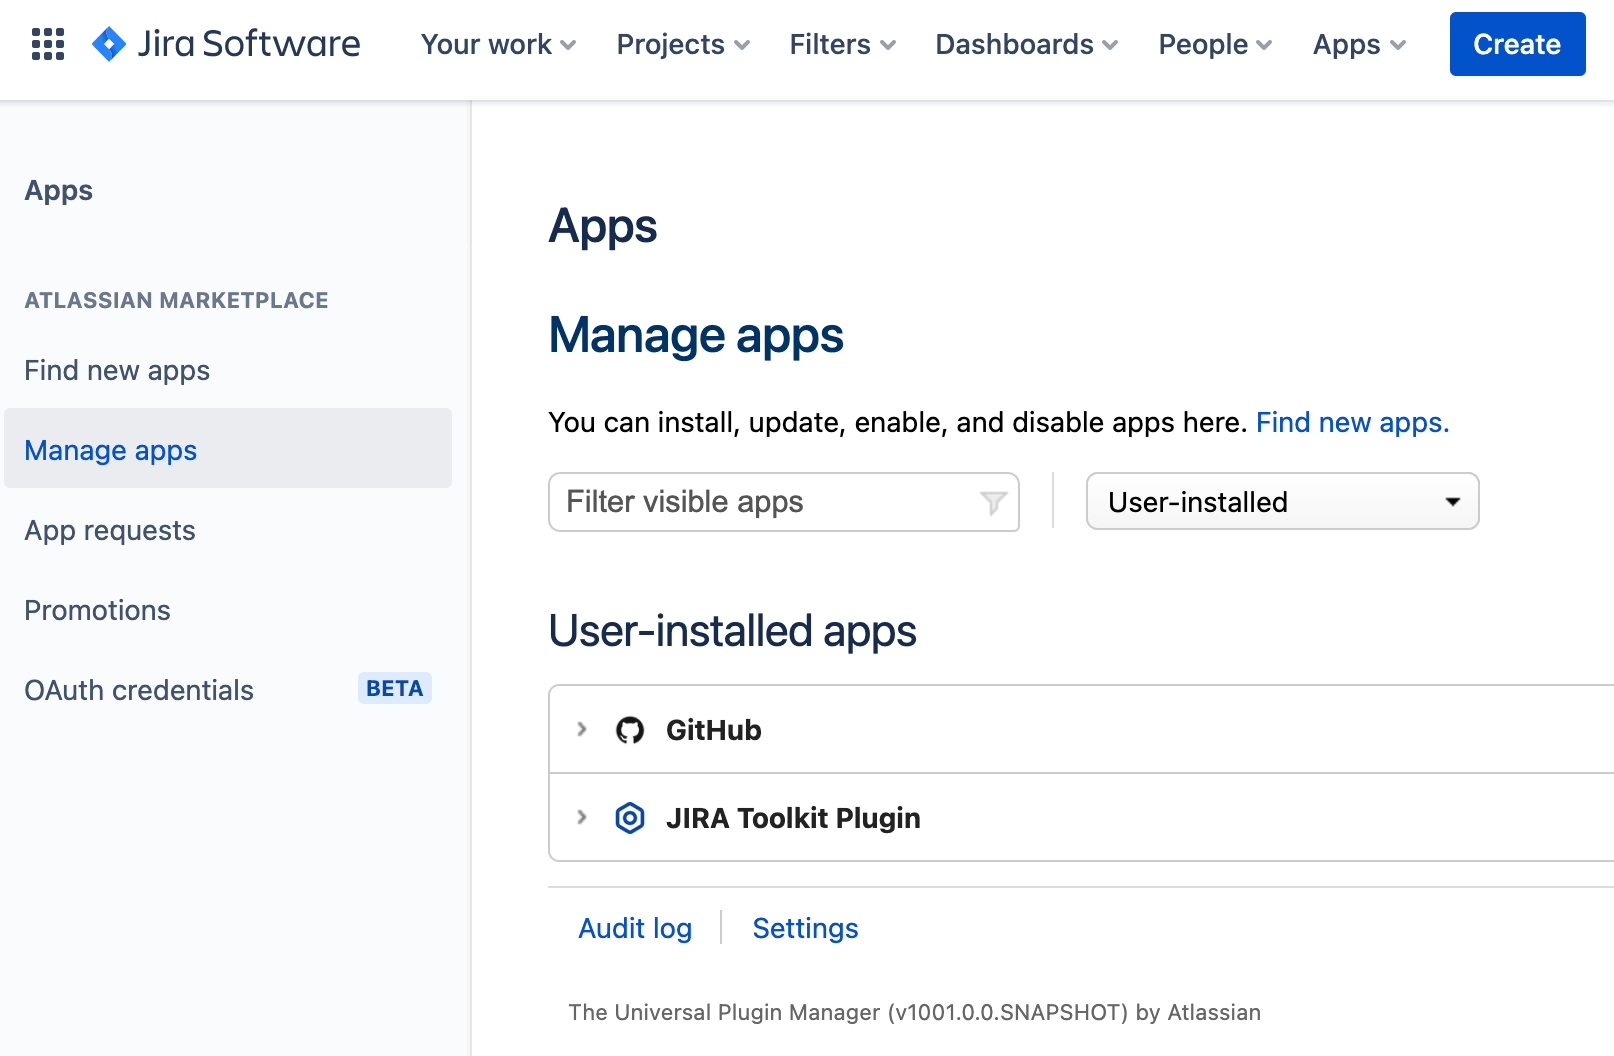 JSW manage apps image